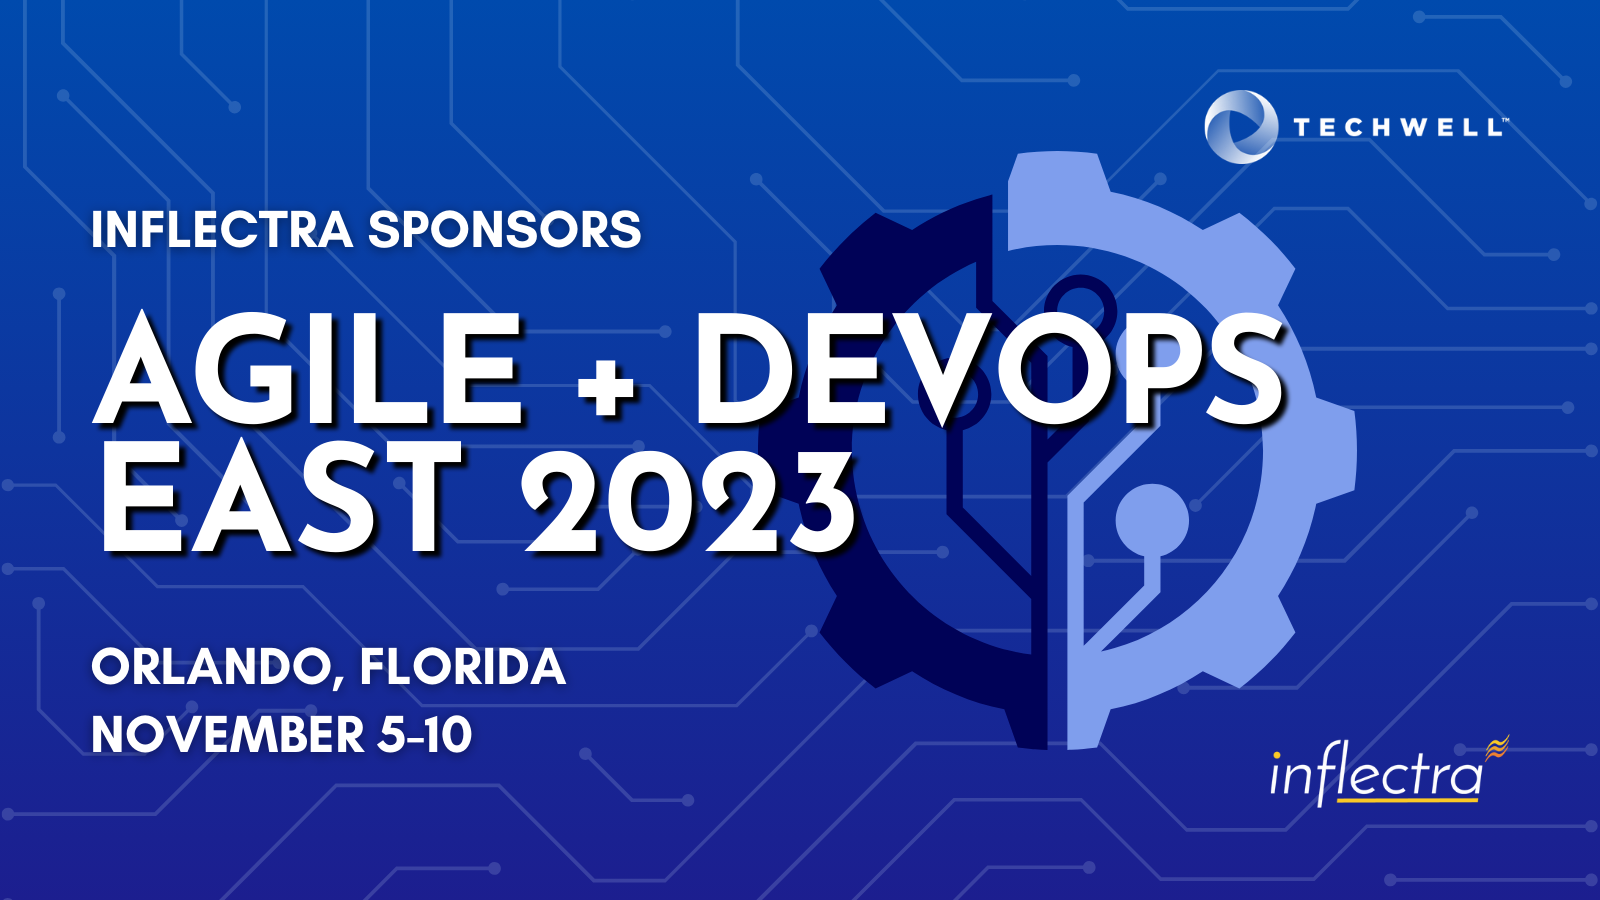 inflectra-sponsors-agile-and-devops-east-in-orlando-florida-this-november-image